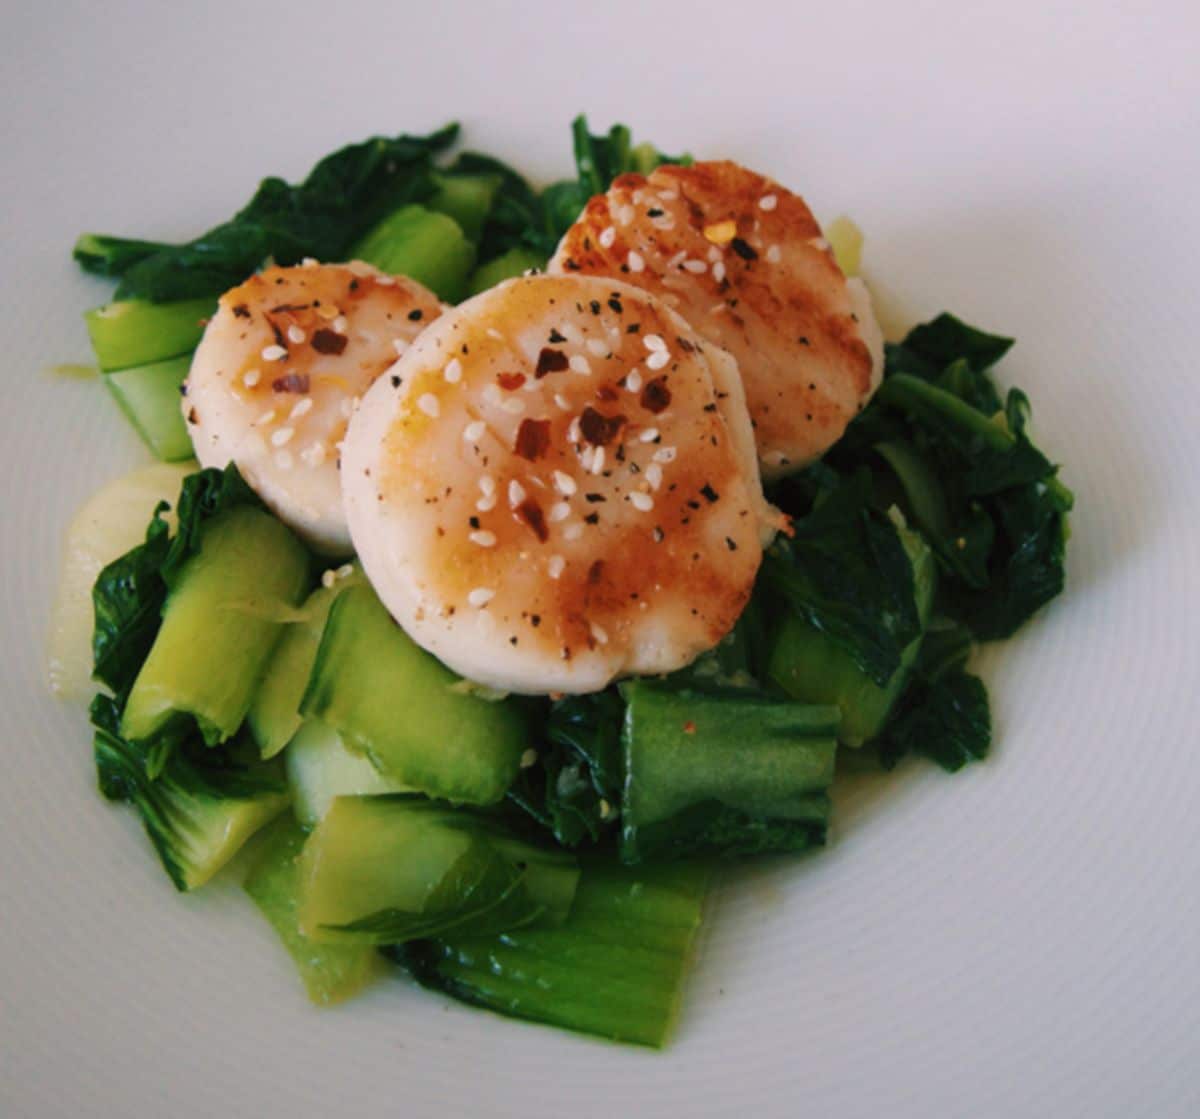 Seared scallops with asian sesame greens